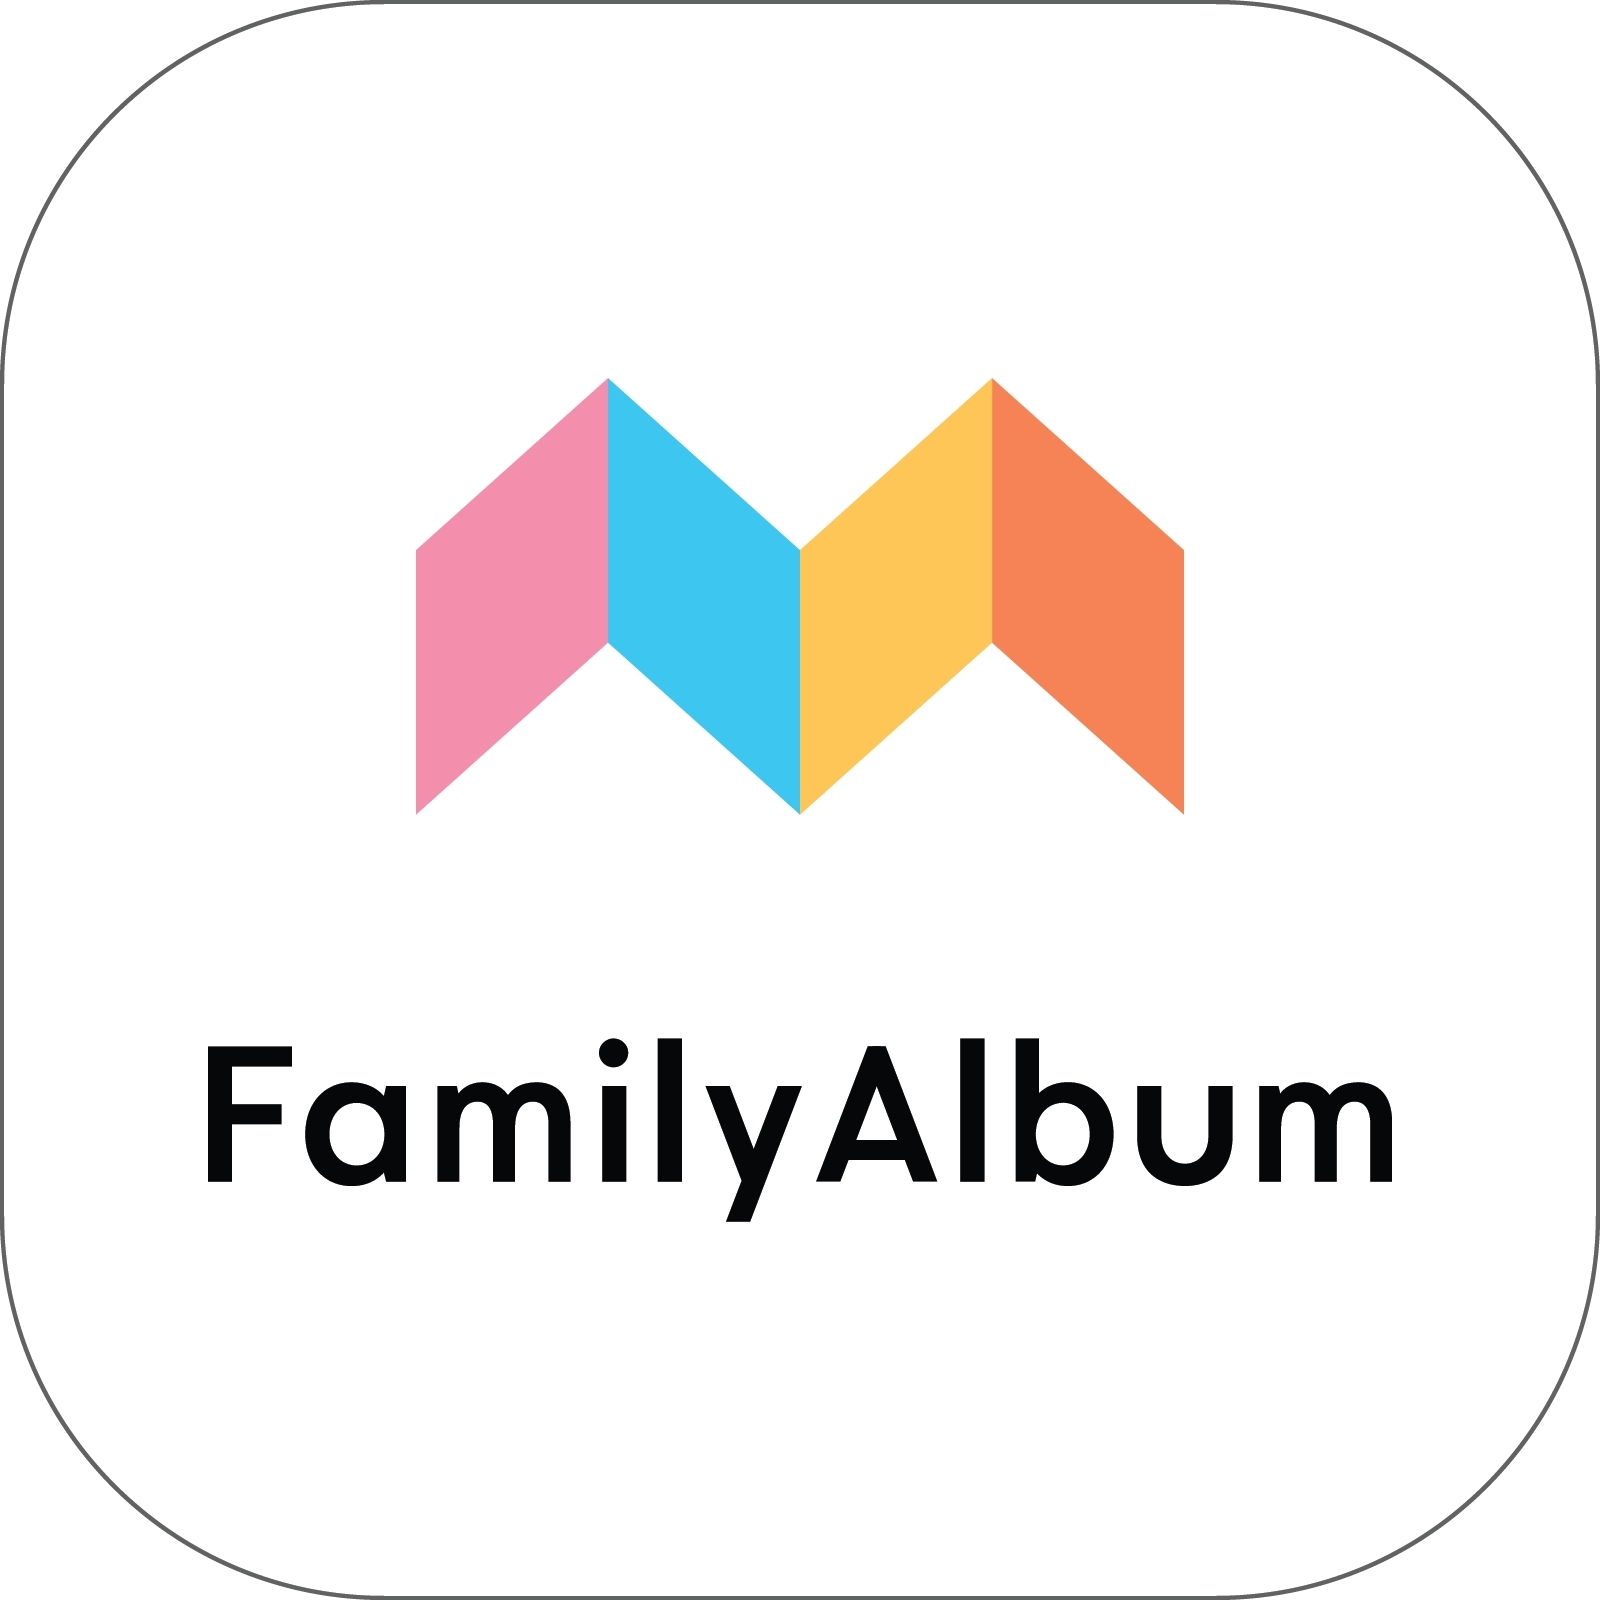 photo and video sharing app familyalbum honored for best user experience in the 23rd annual webby awards | business wire